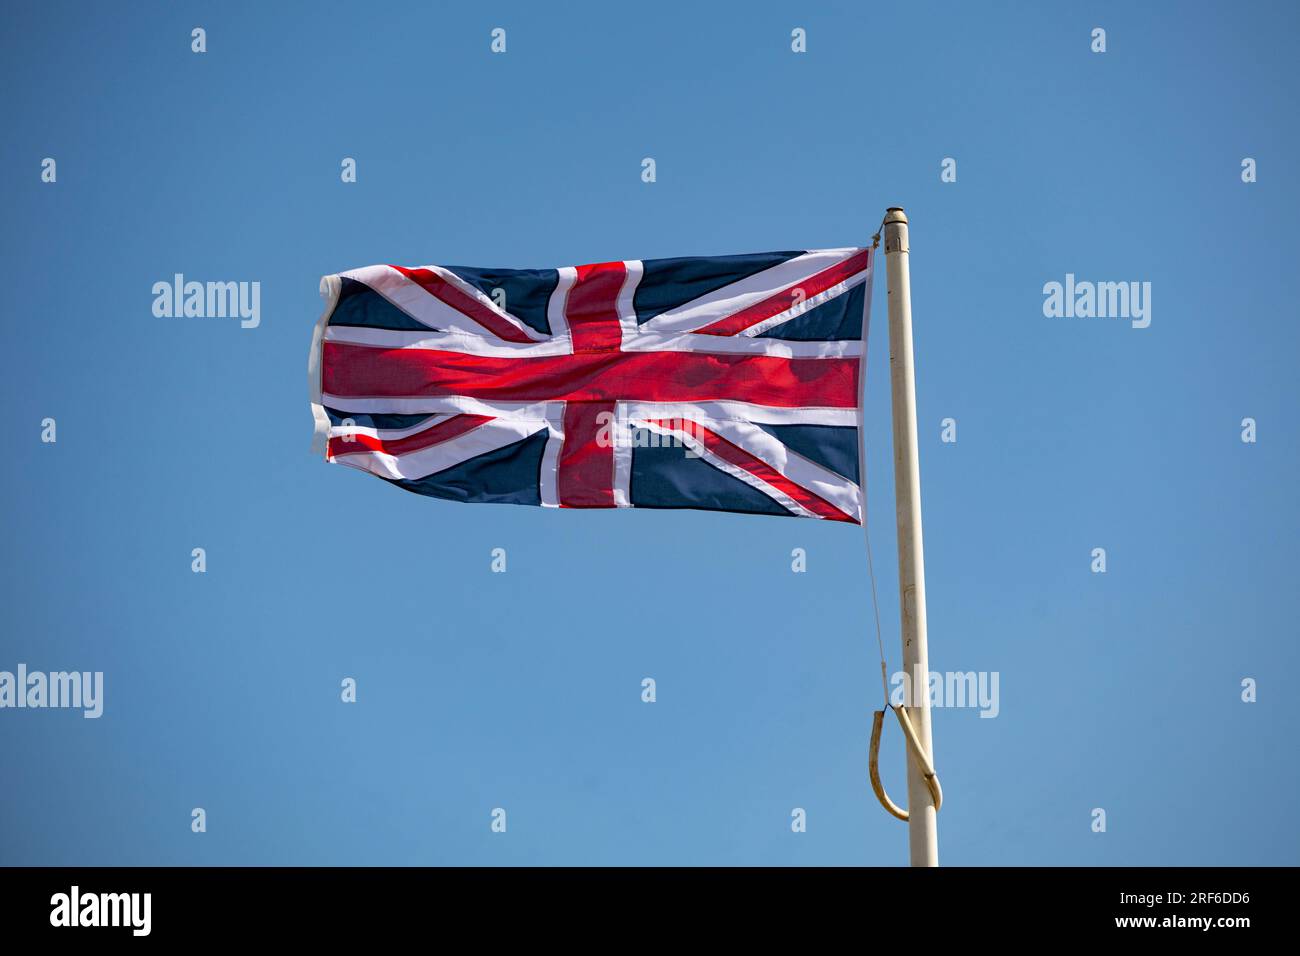 Union flag blowing in the wind, Worthing, West Sussex, UK Stock Photo